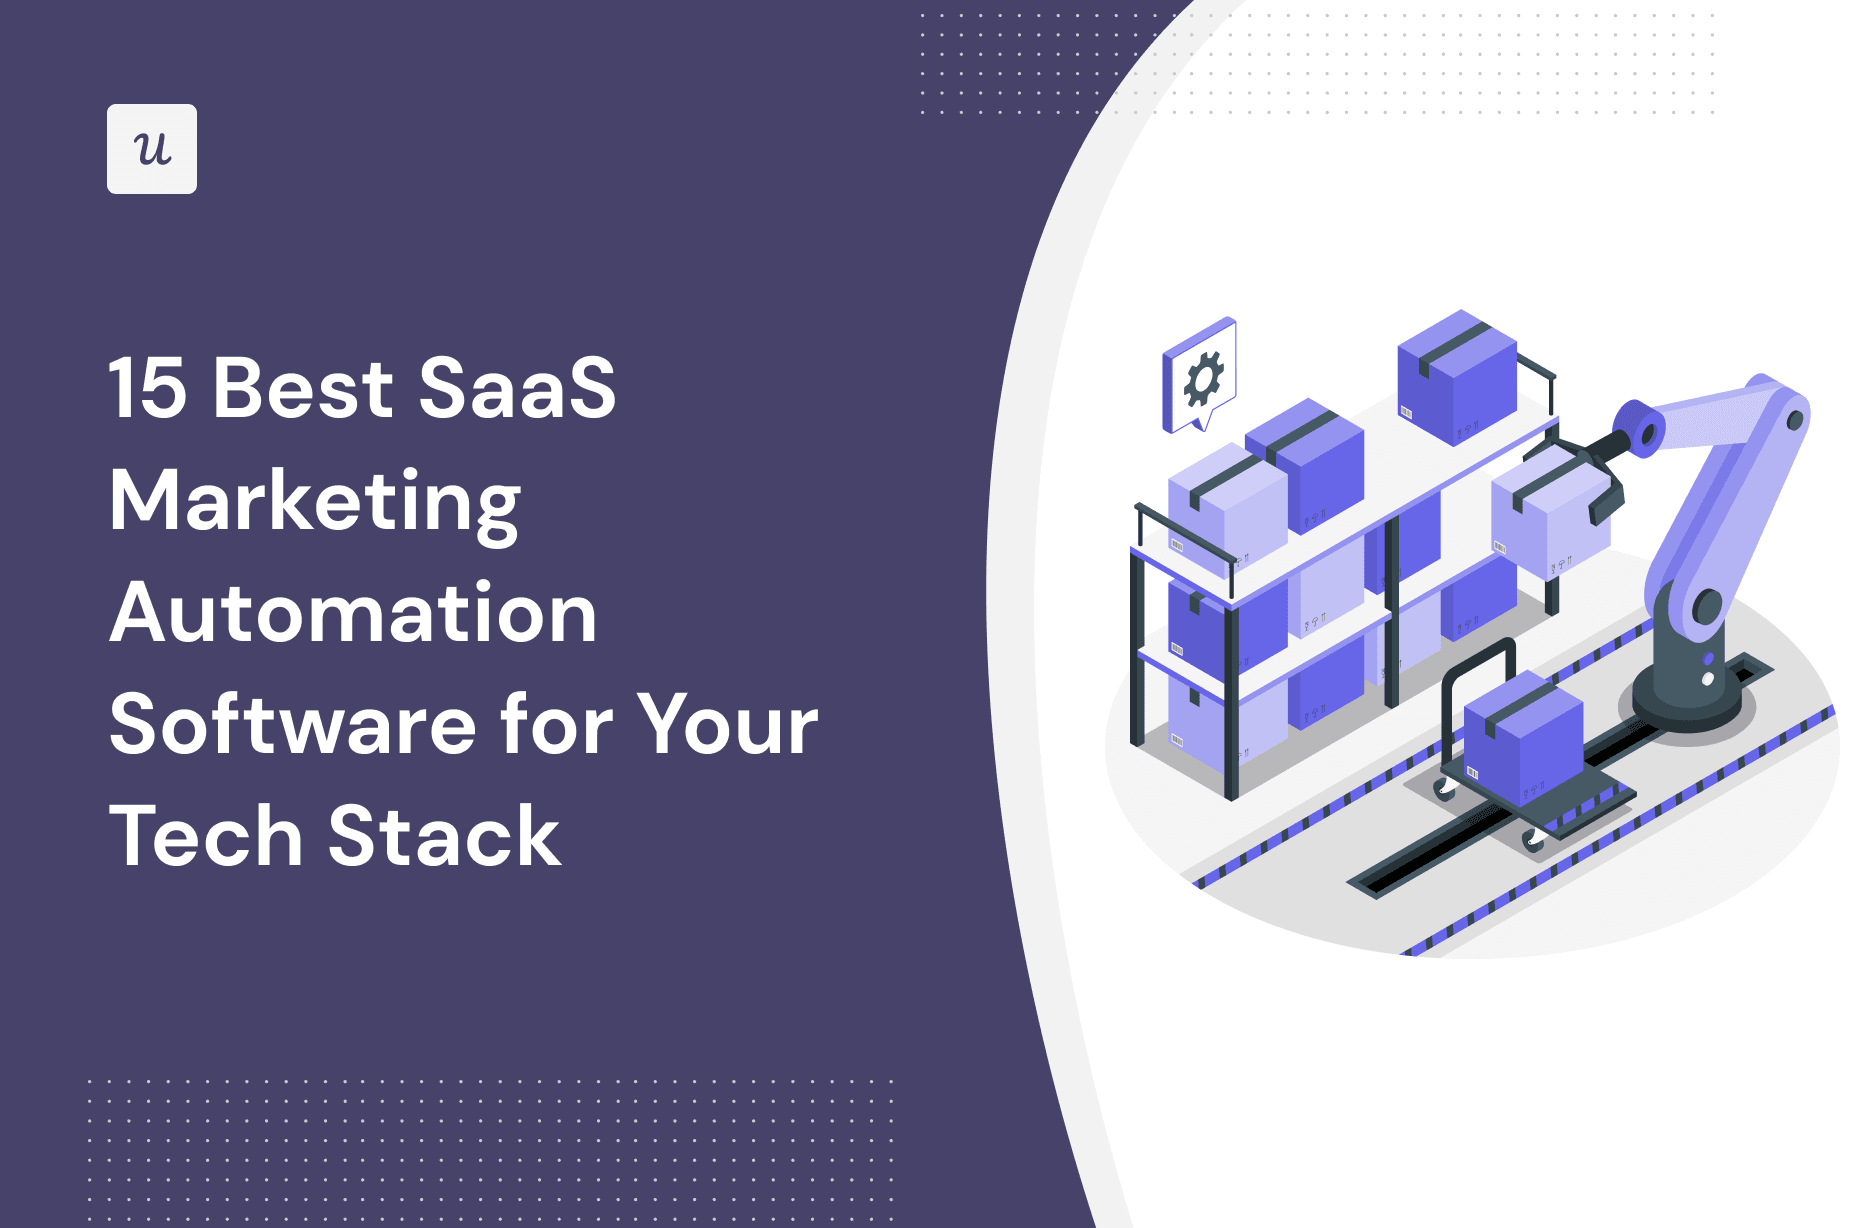 15 Best SaaS Marketing Automation Software for Your Tech Stack cover